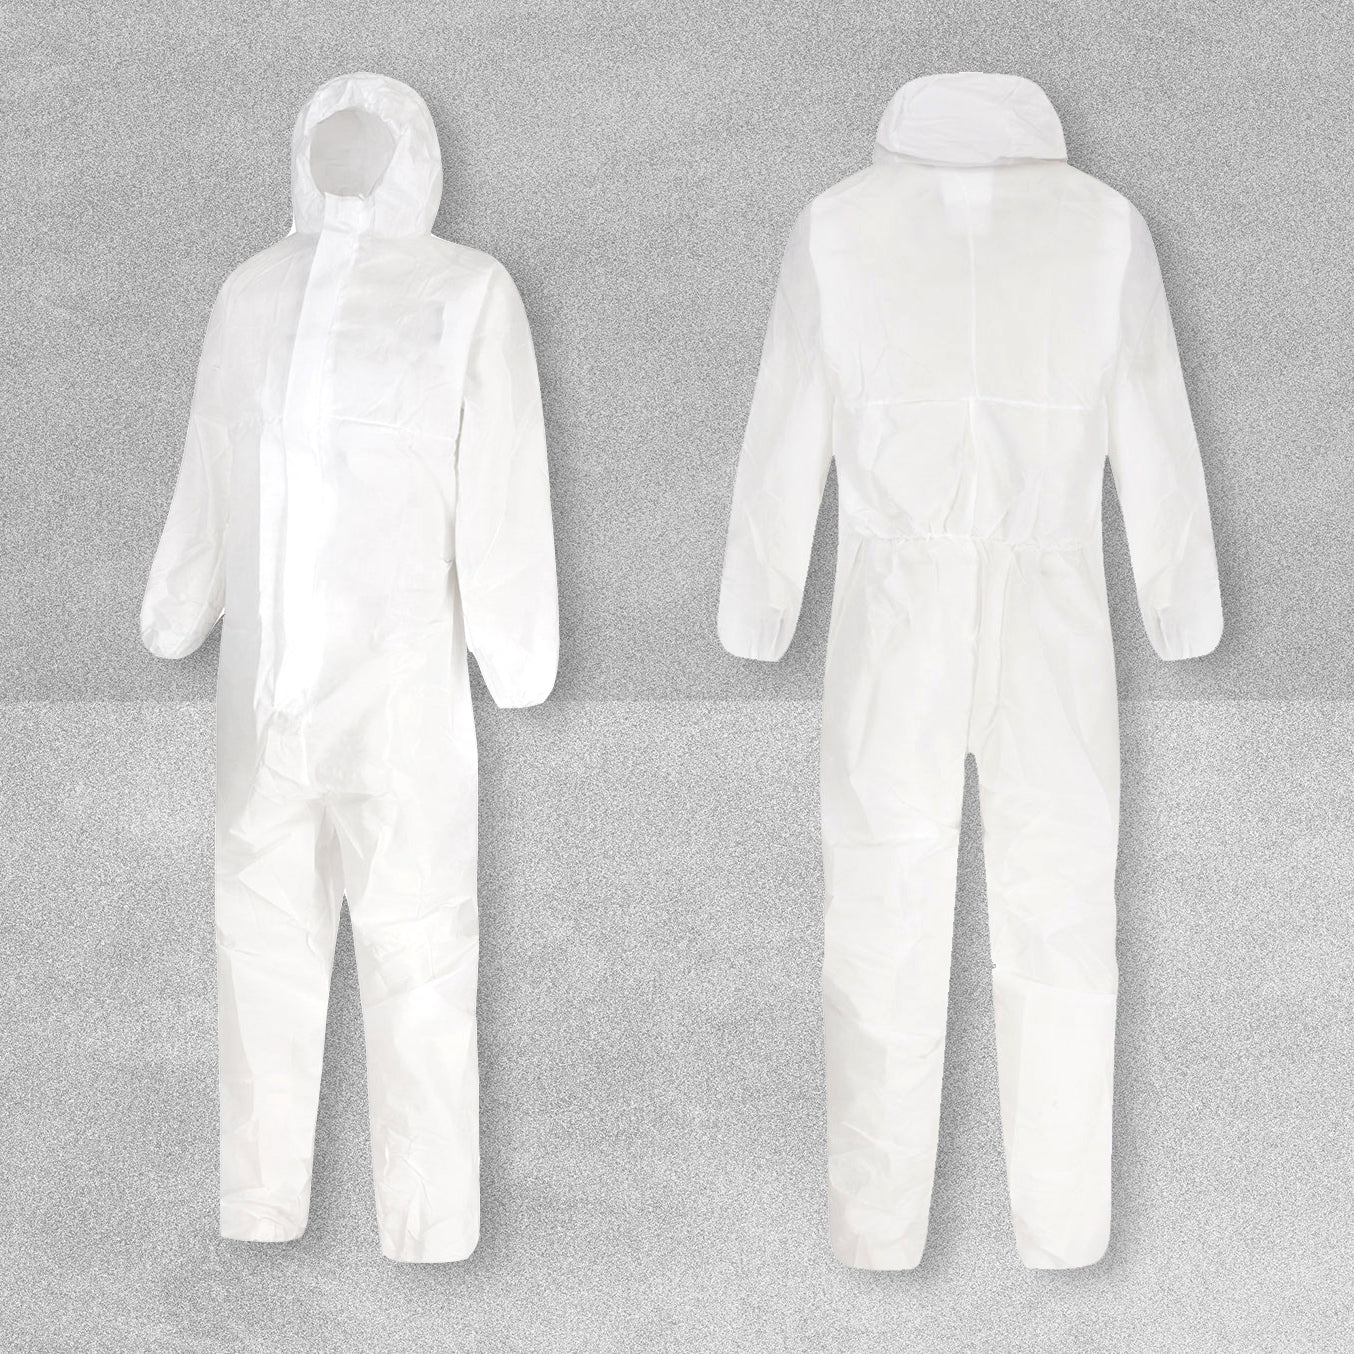 Disposable Protective Overalls - Sizes M & XL